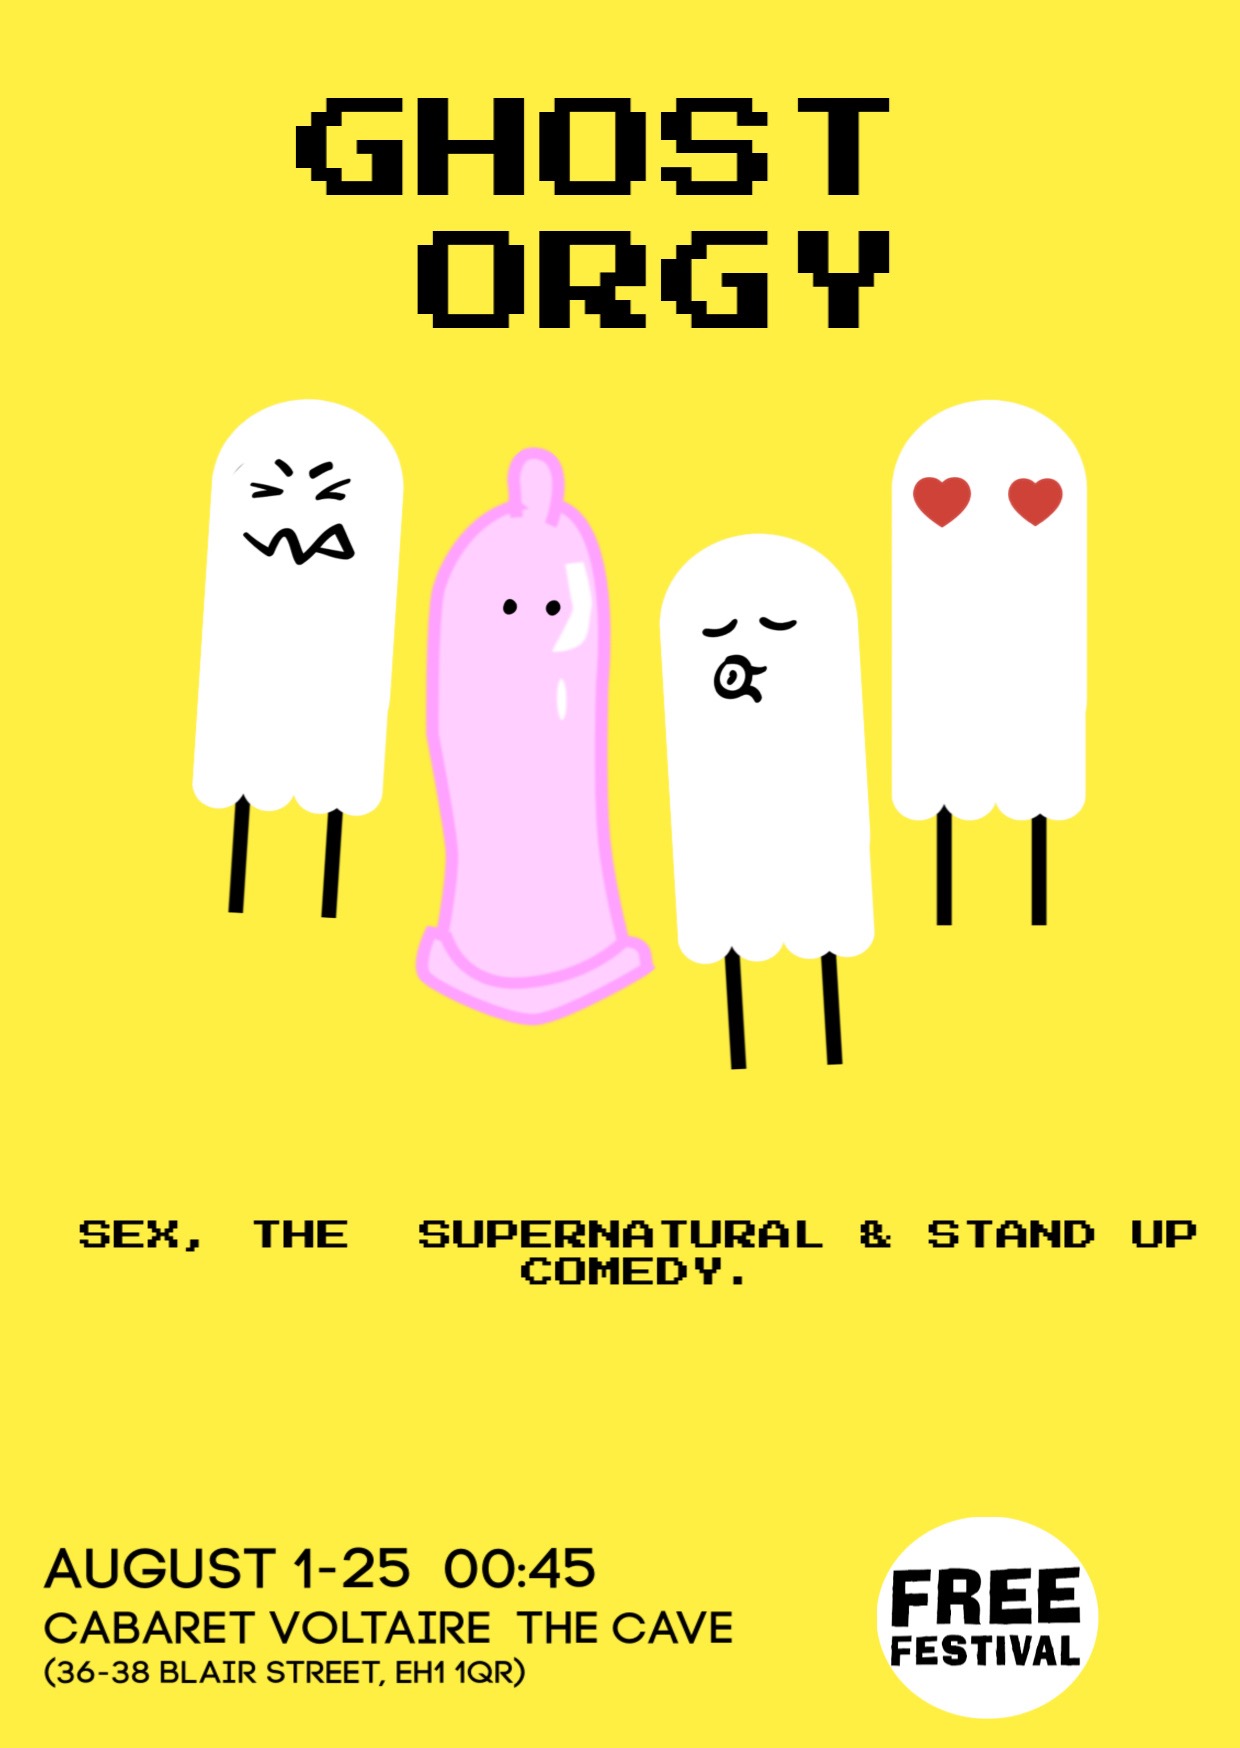 The poster for Ghost Orgy